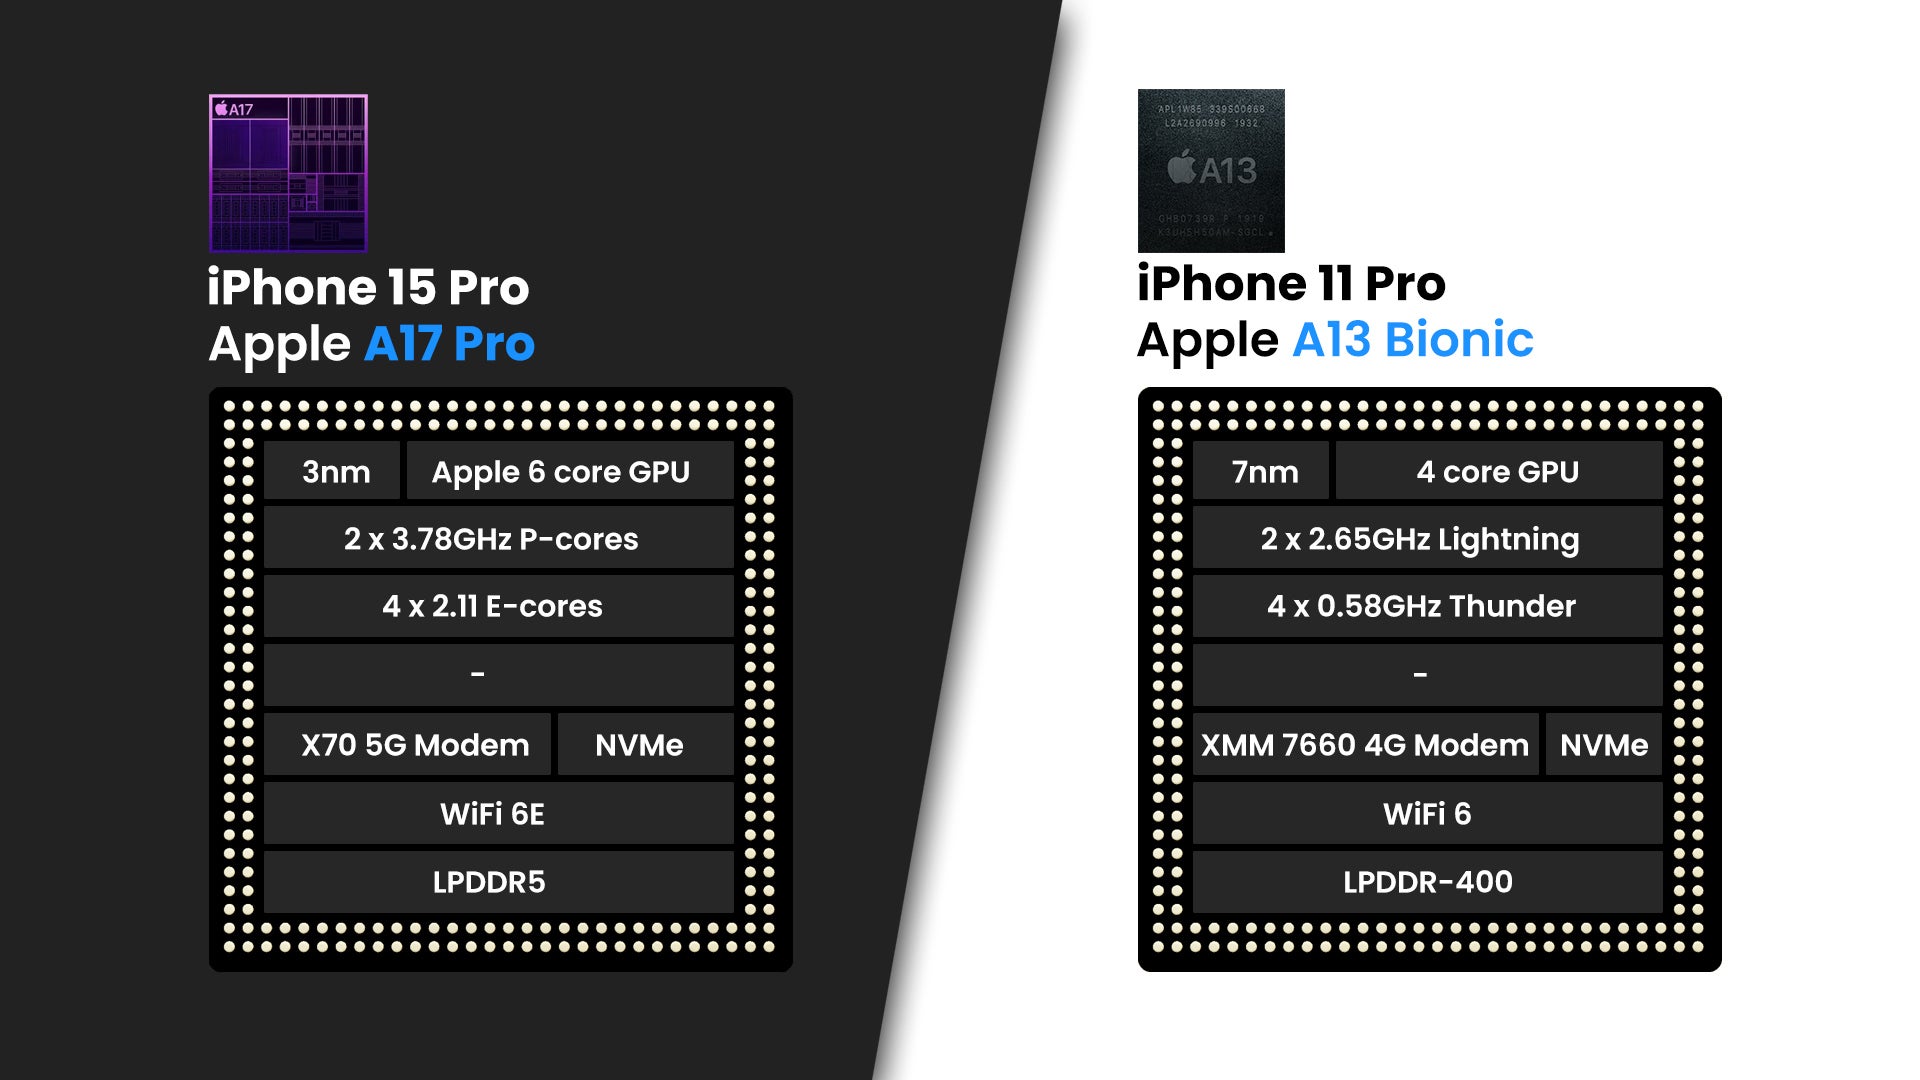 (Image Credit - PhoneArena) - iPhone 15 Pro vs iPhone 11 Pro: What has changed?